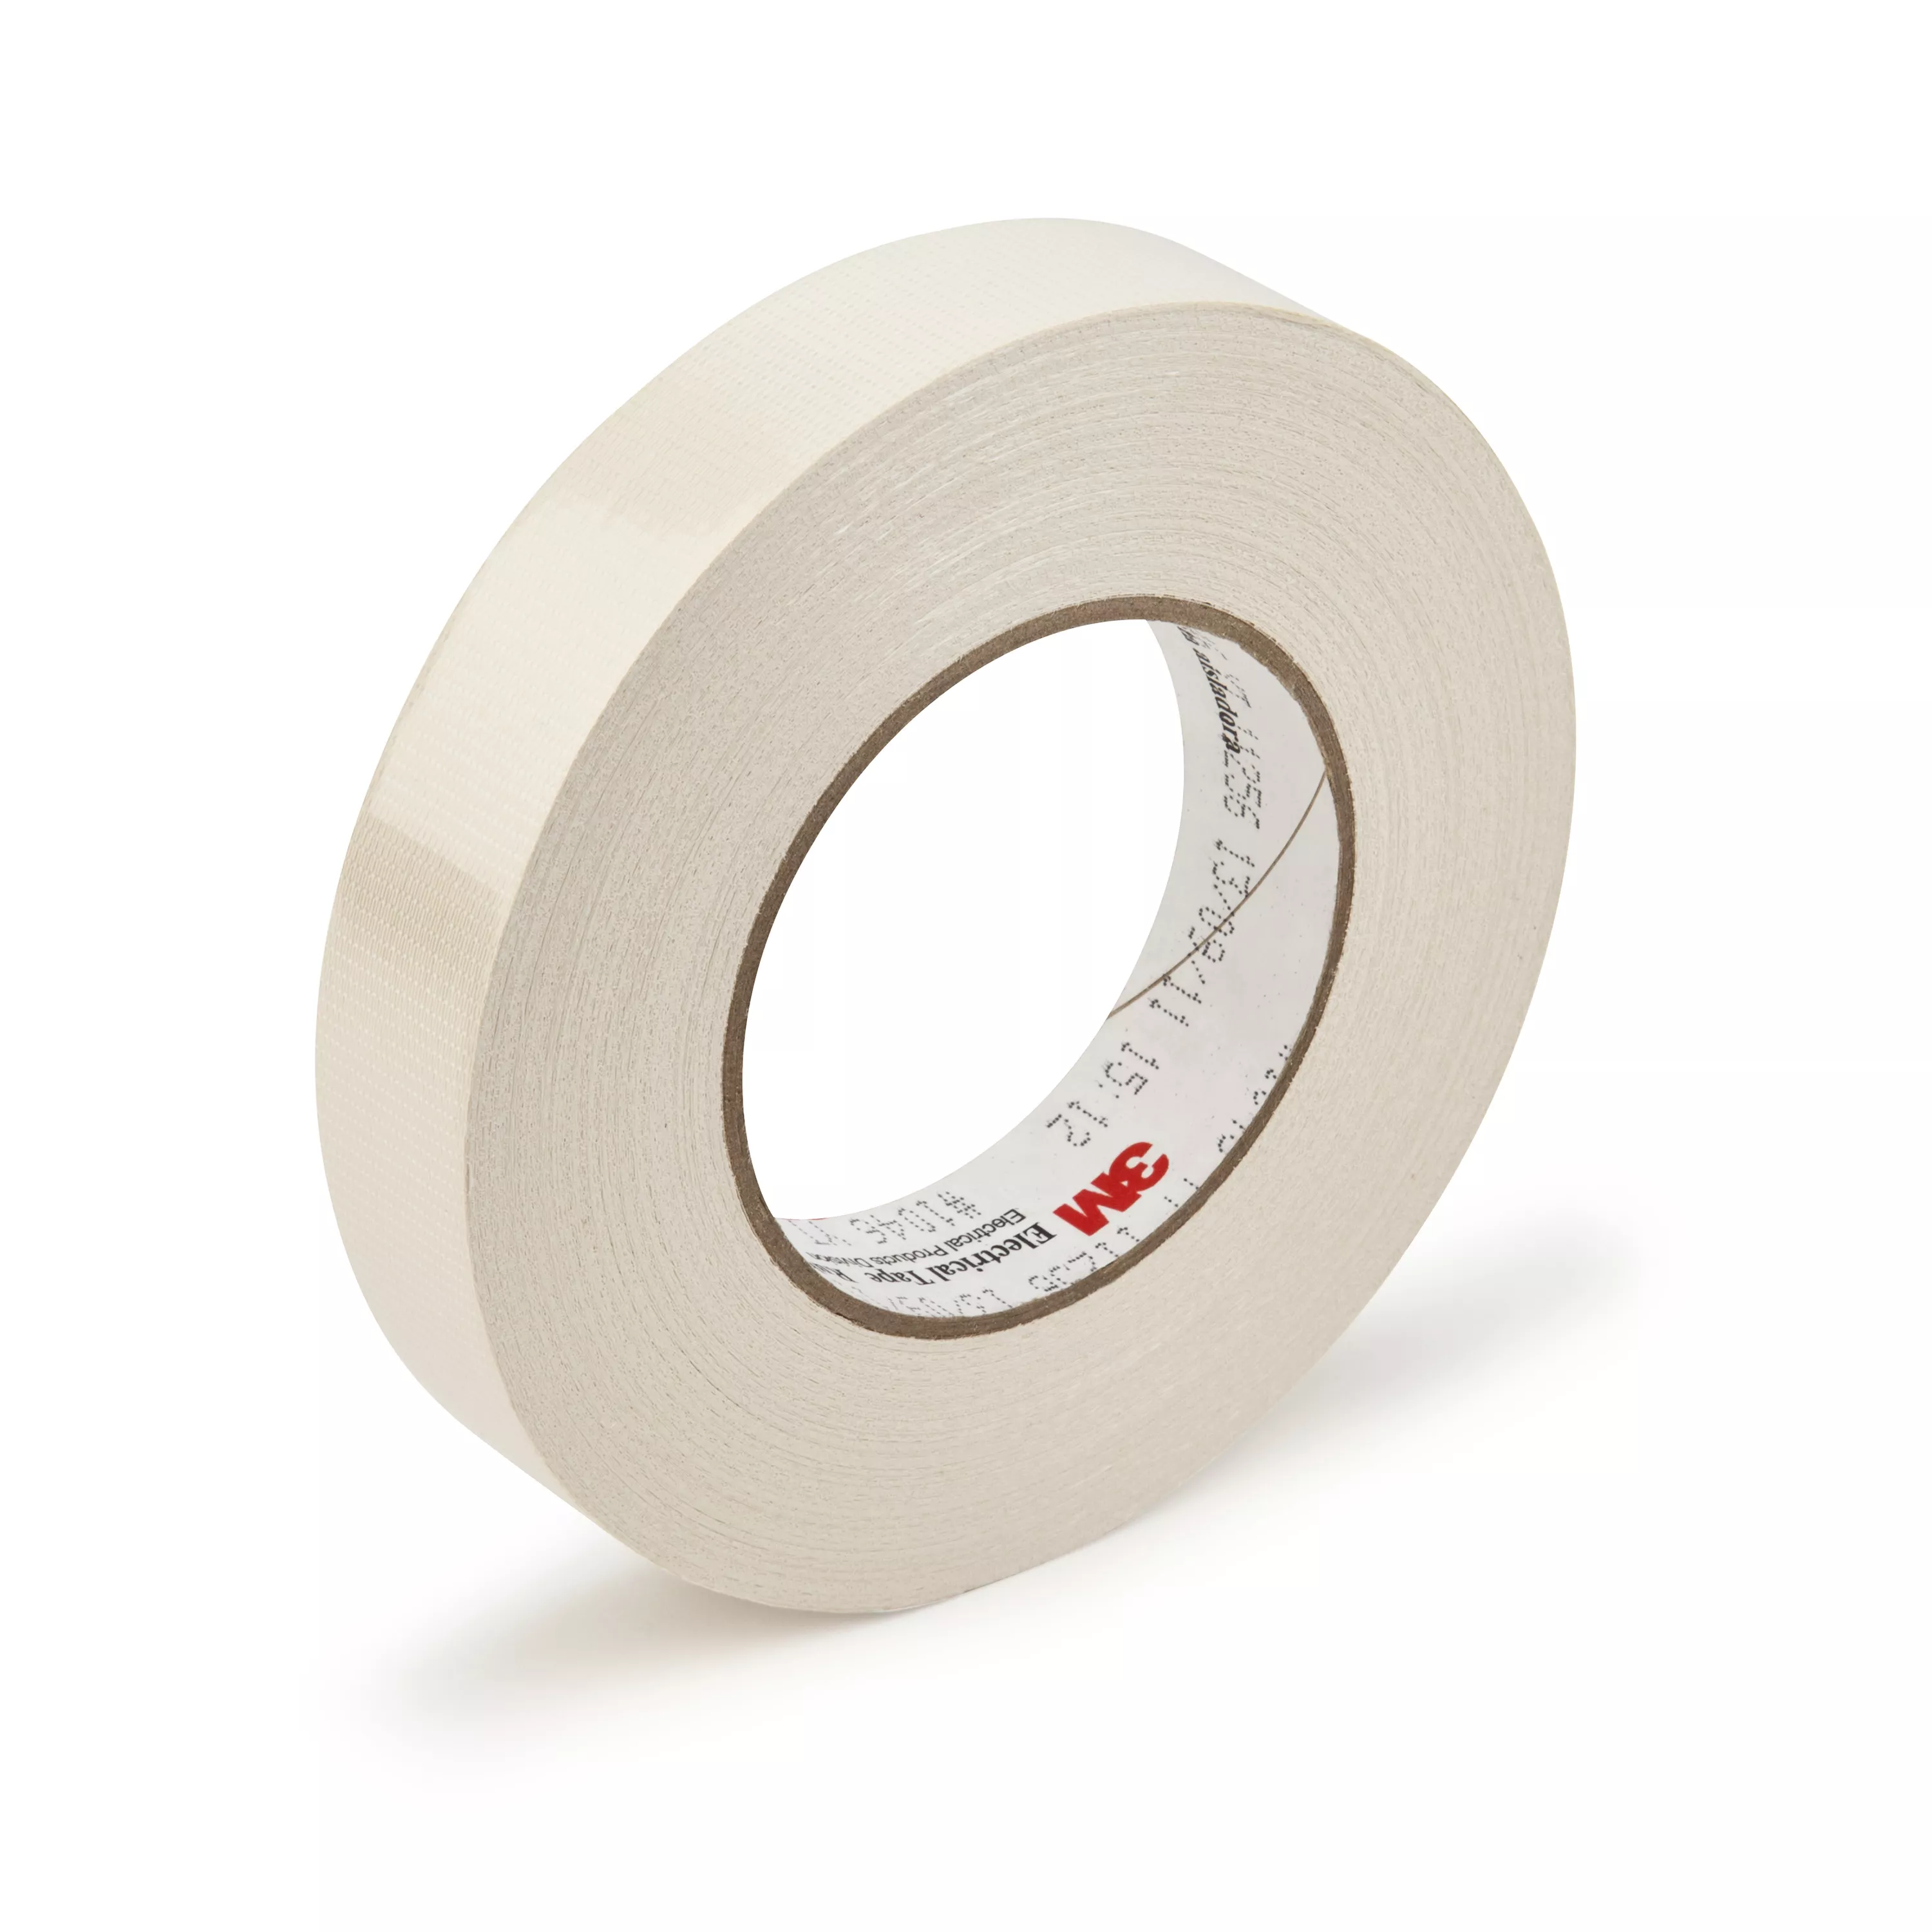 3M™ Filament-Reinforced Electrical Tape 1046, 23 in X 60 yds, plastic
core,